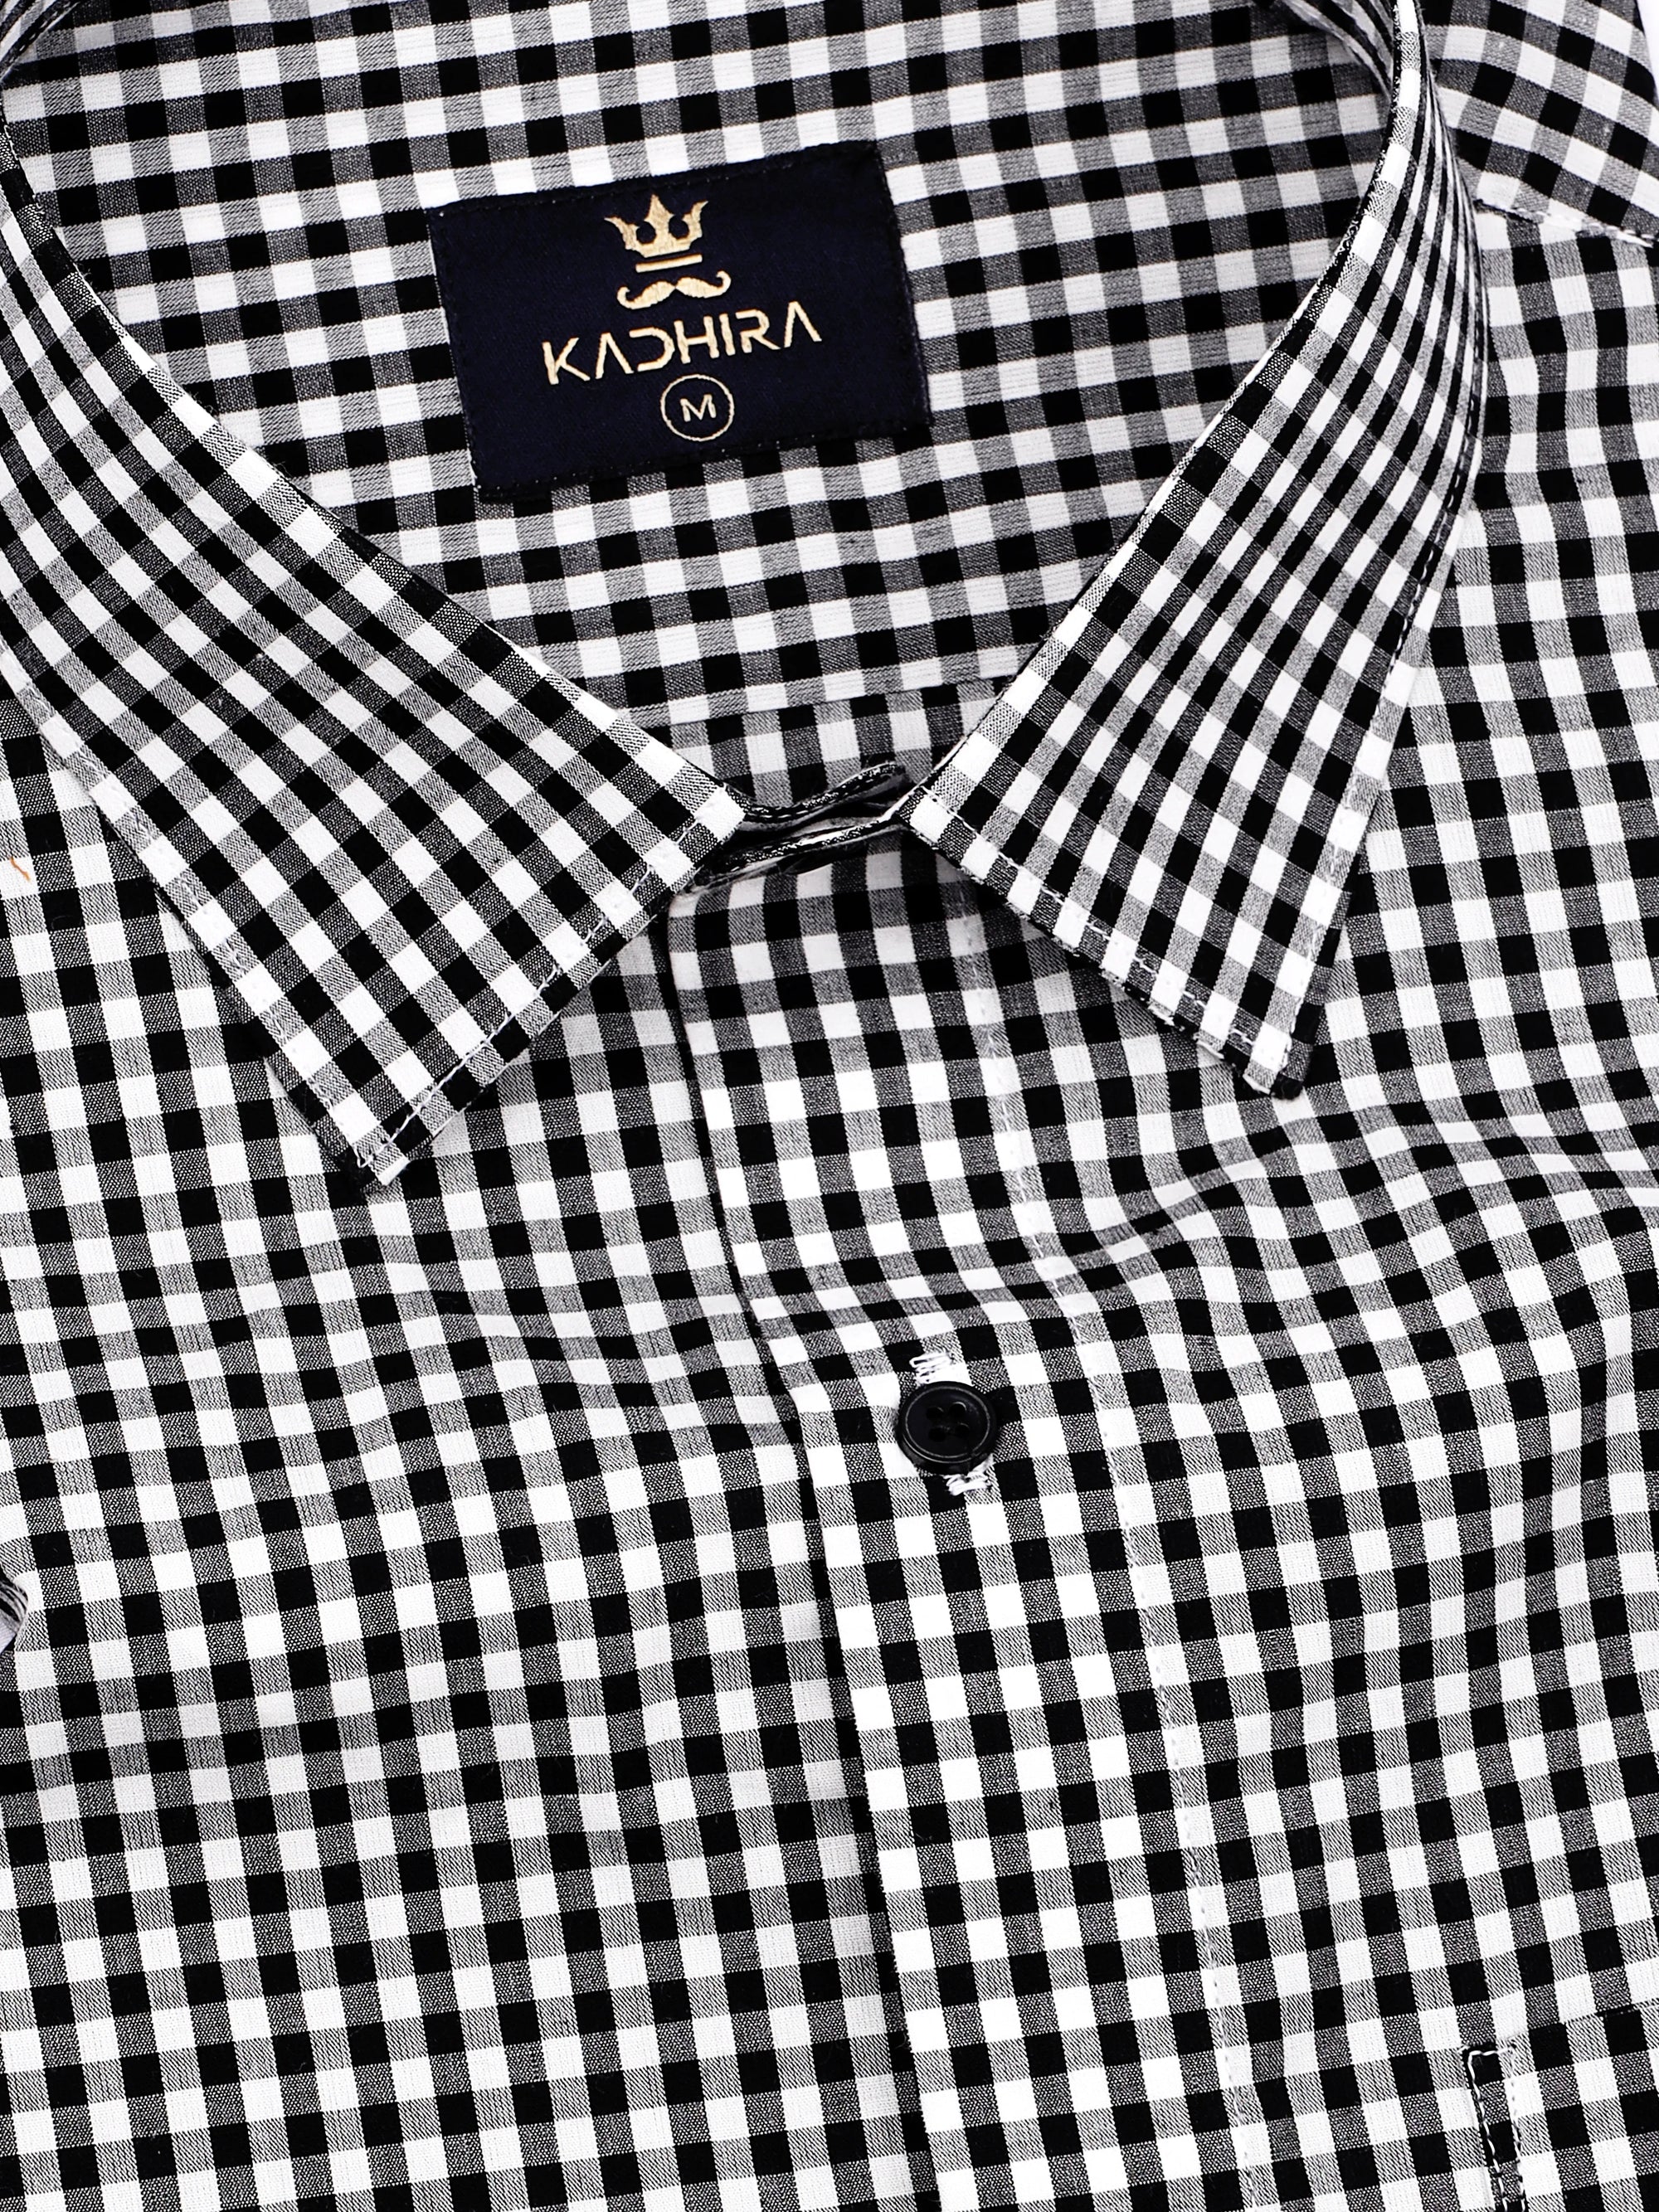 Cool Black With White Gingham Check Super Premium Cotton Shirt-[ON SALE]